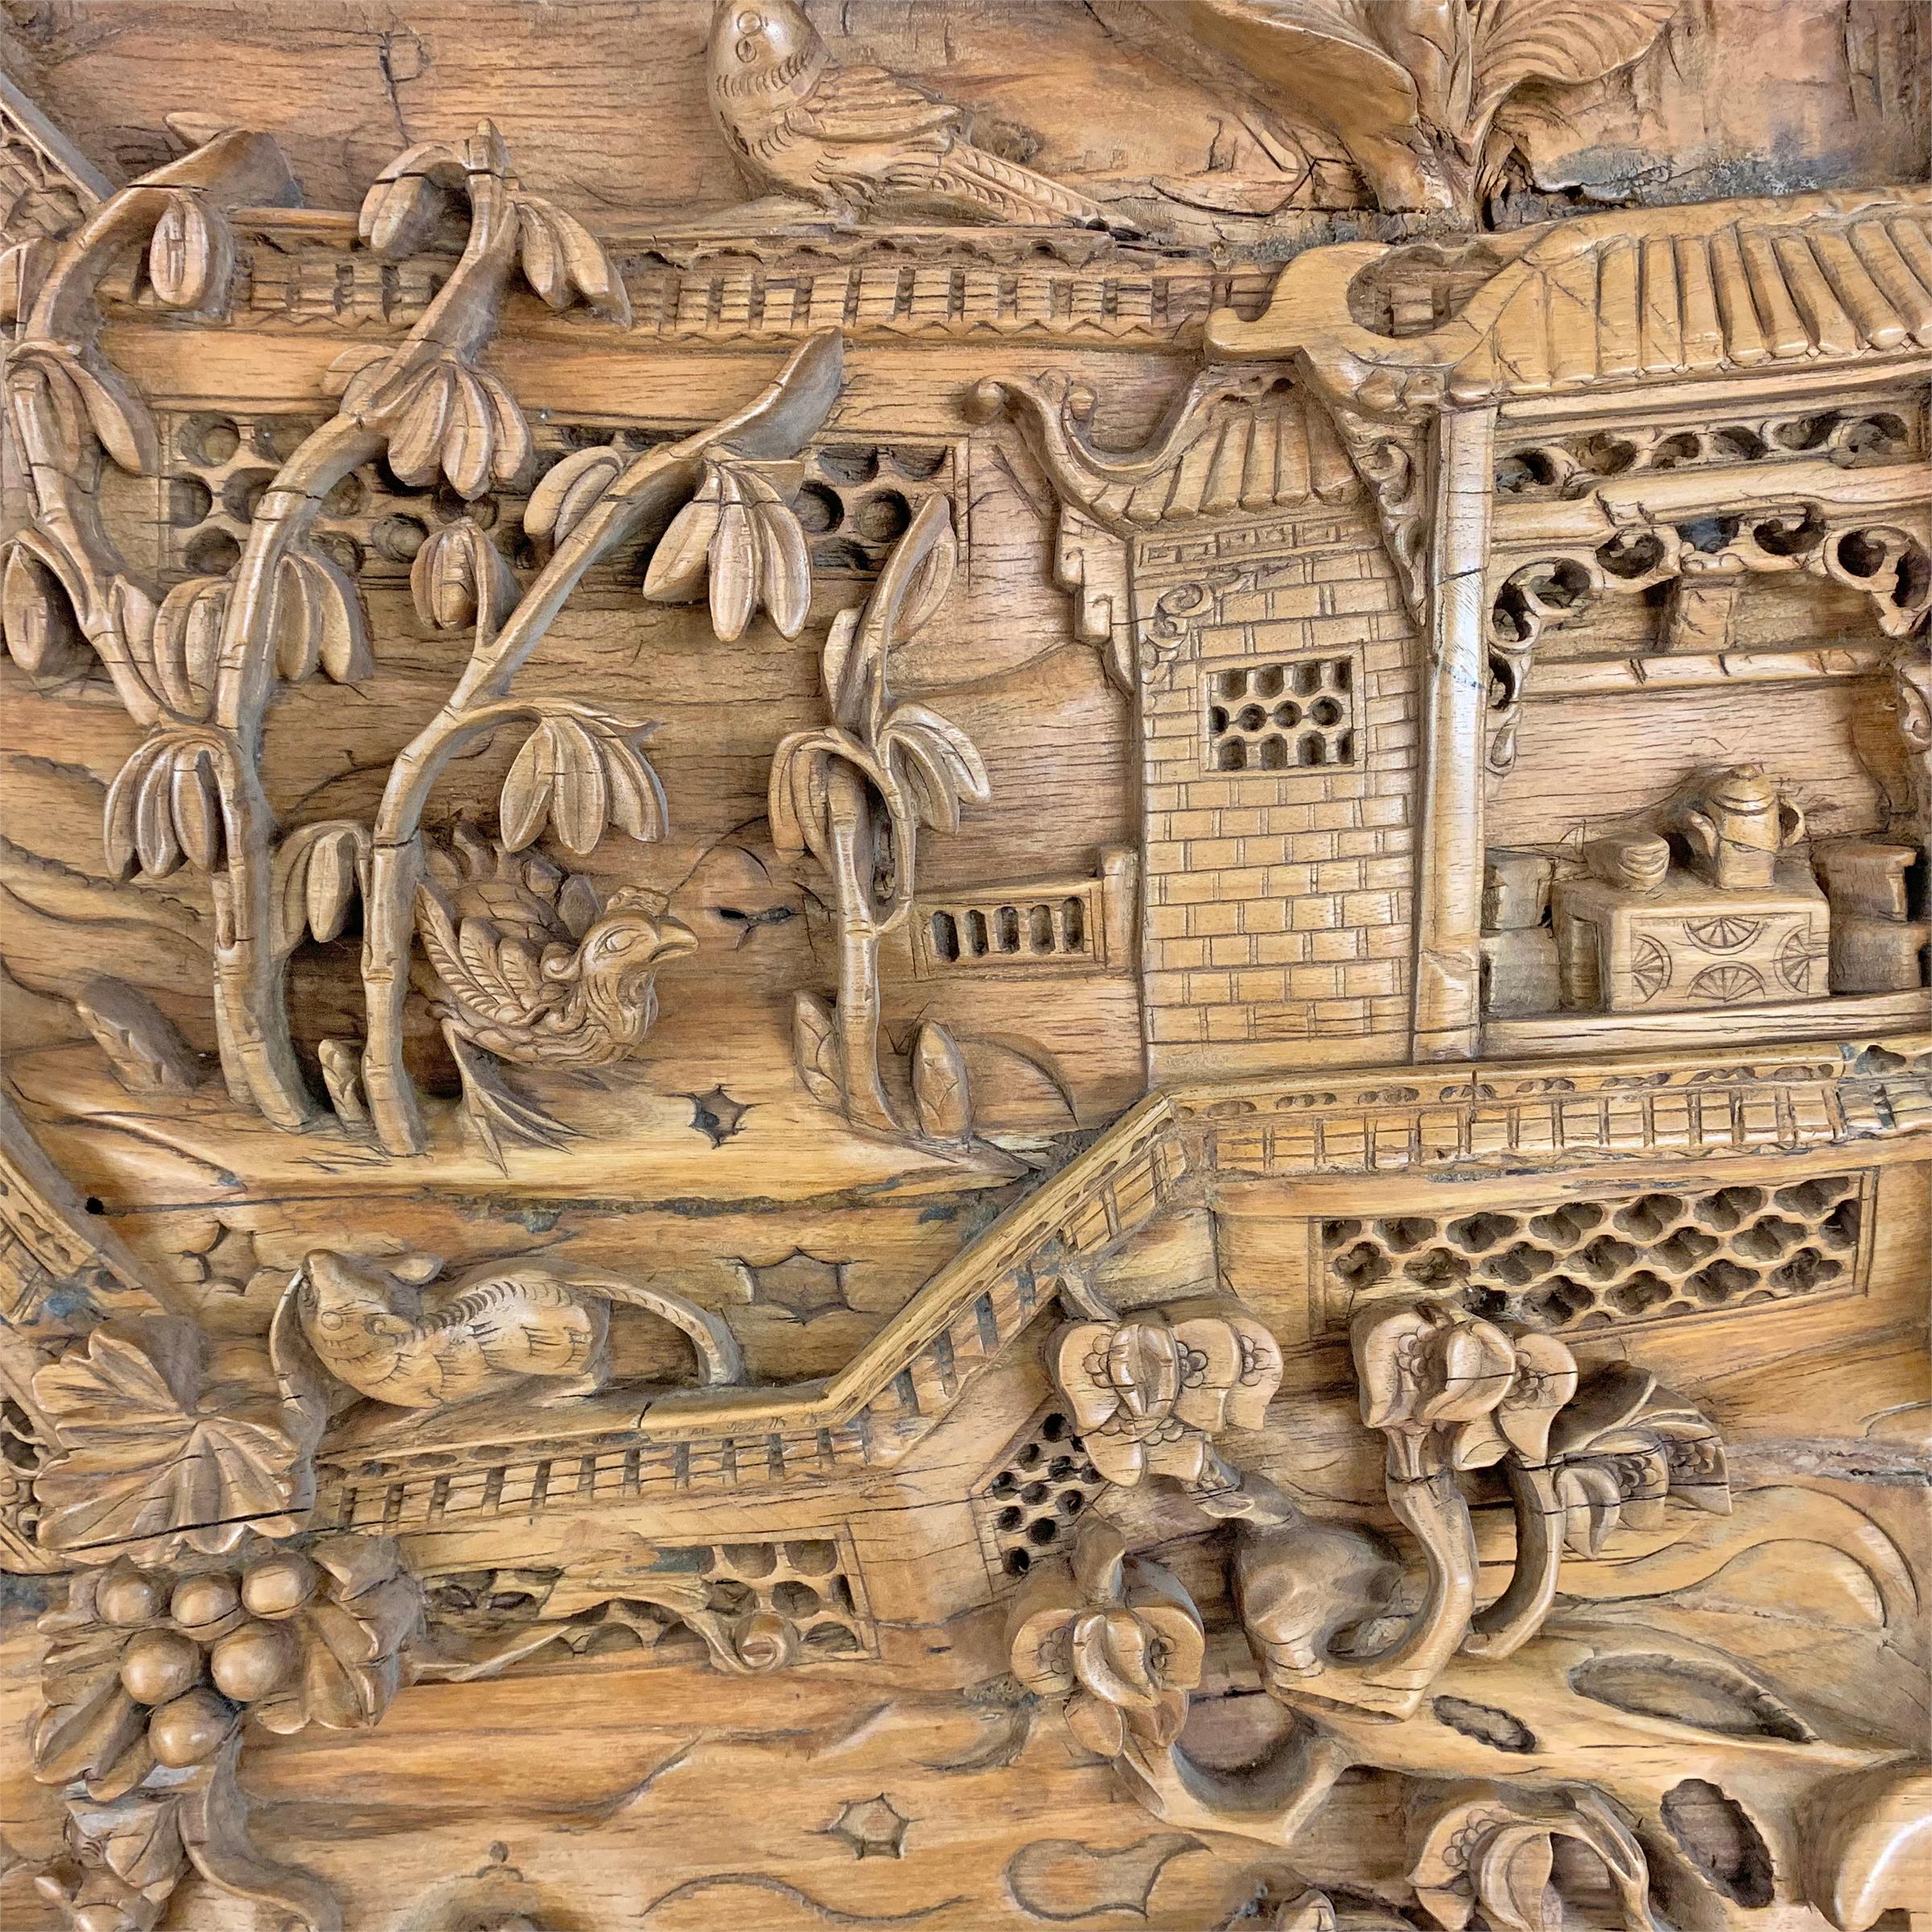 An incredible 19th century Chinese wooden architectural panel carved in high relief depicting a walled courtyard scholars garden with multiple pavilions and a bridge amidst auspicious flowering trees and a lotus pond, with various bulls, mice, and